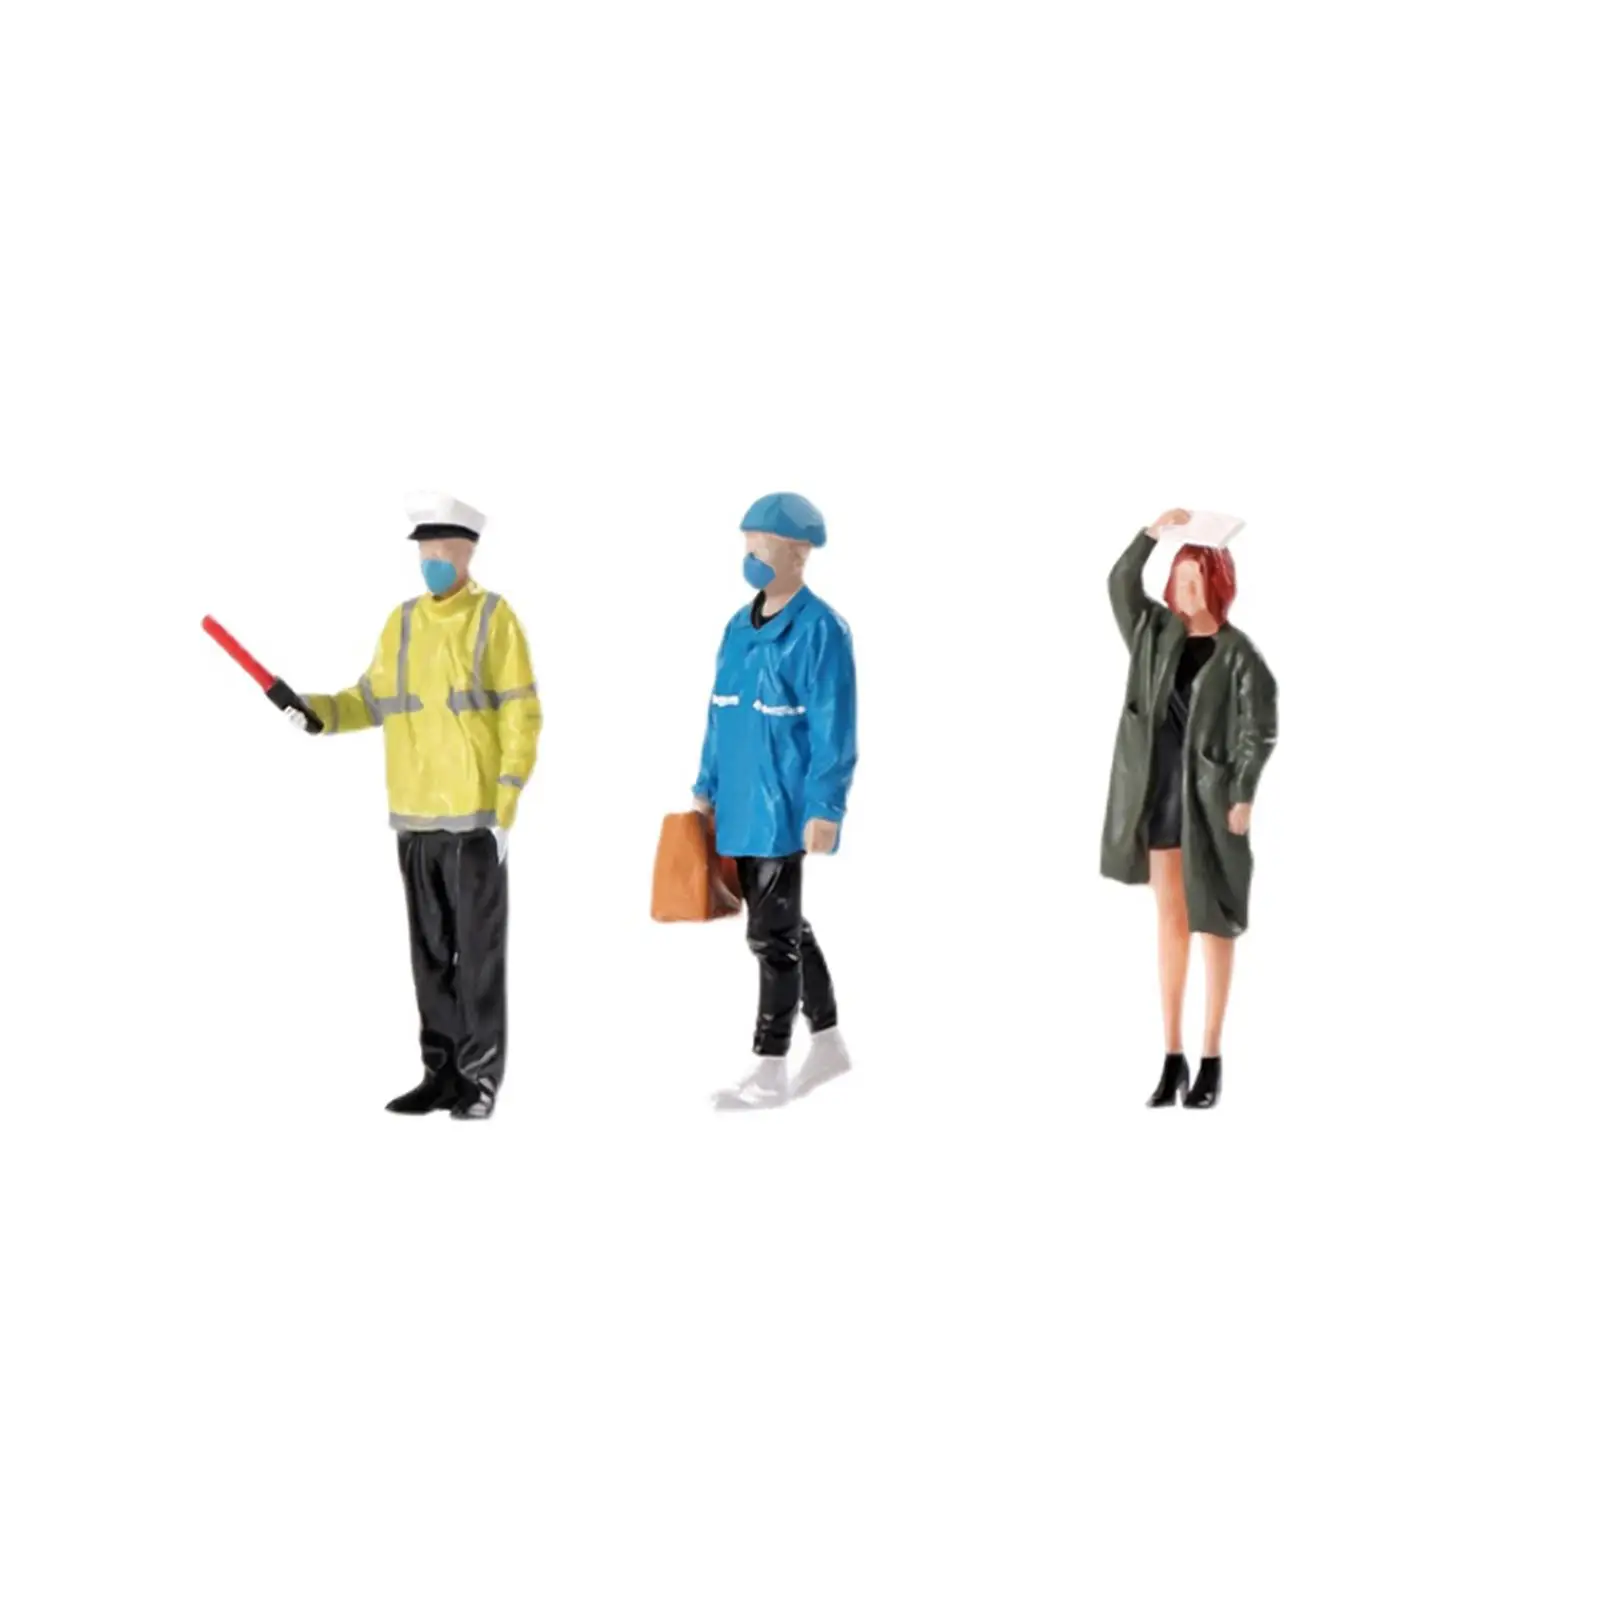 3 pieces 1/32 Scale People Figure, People Figurines, Mini Model Trains Architectural Tiny People Model